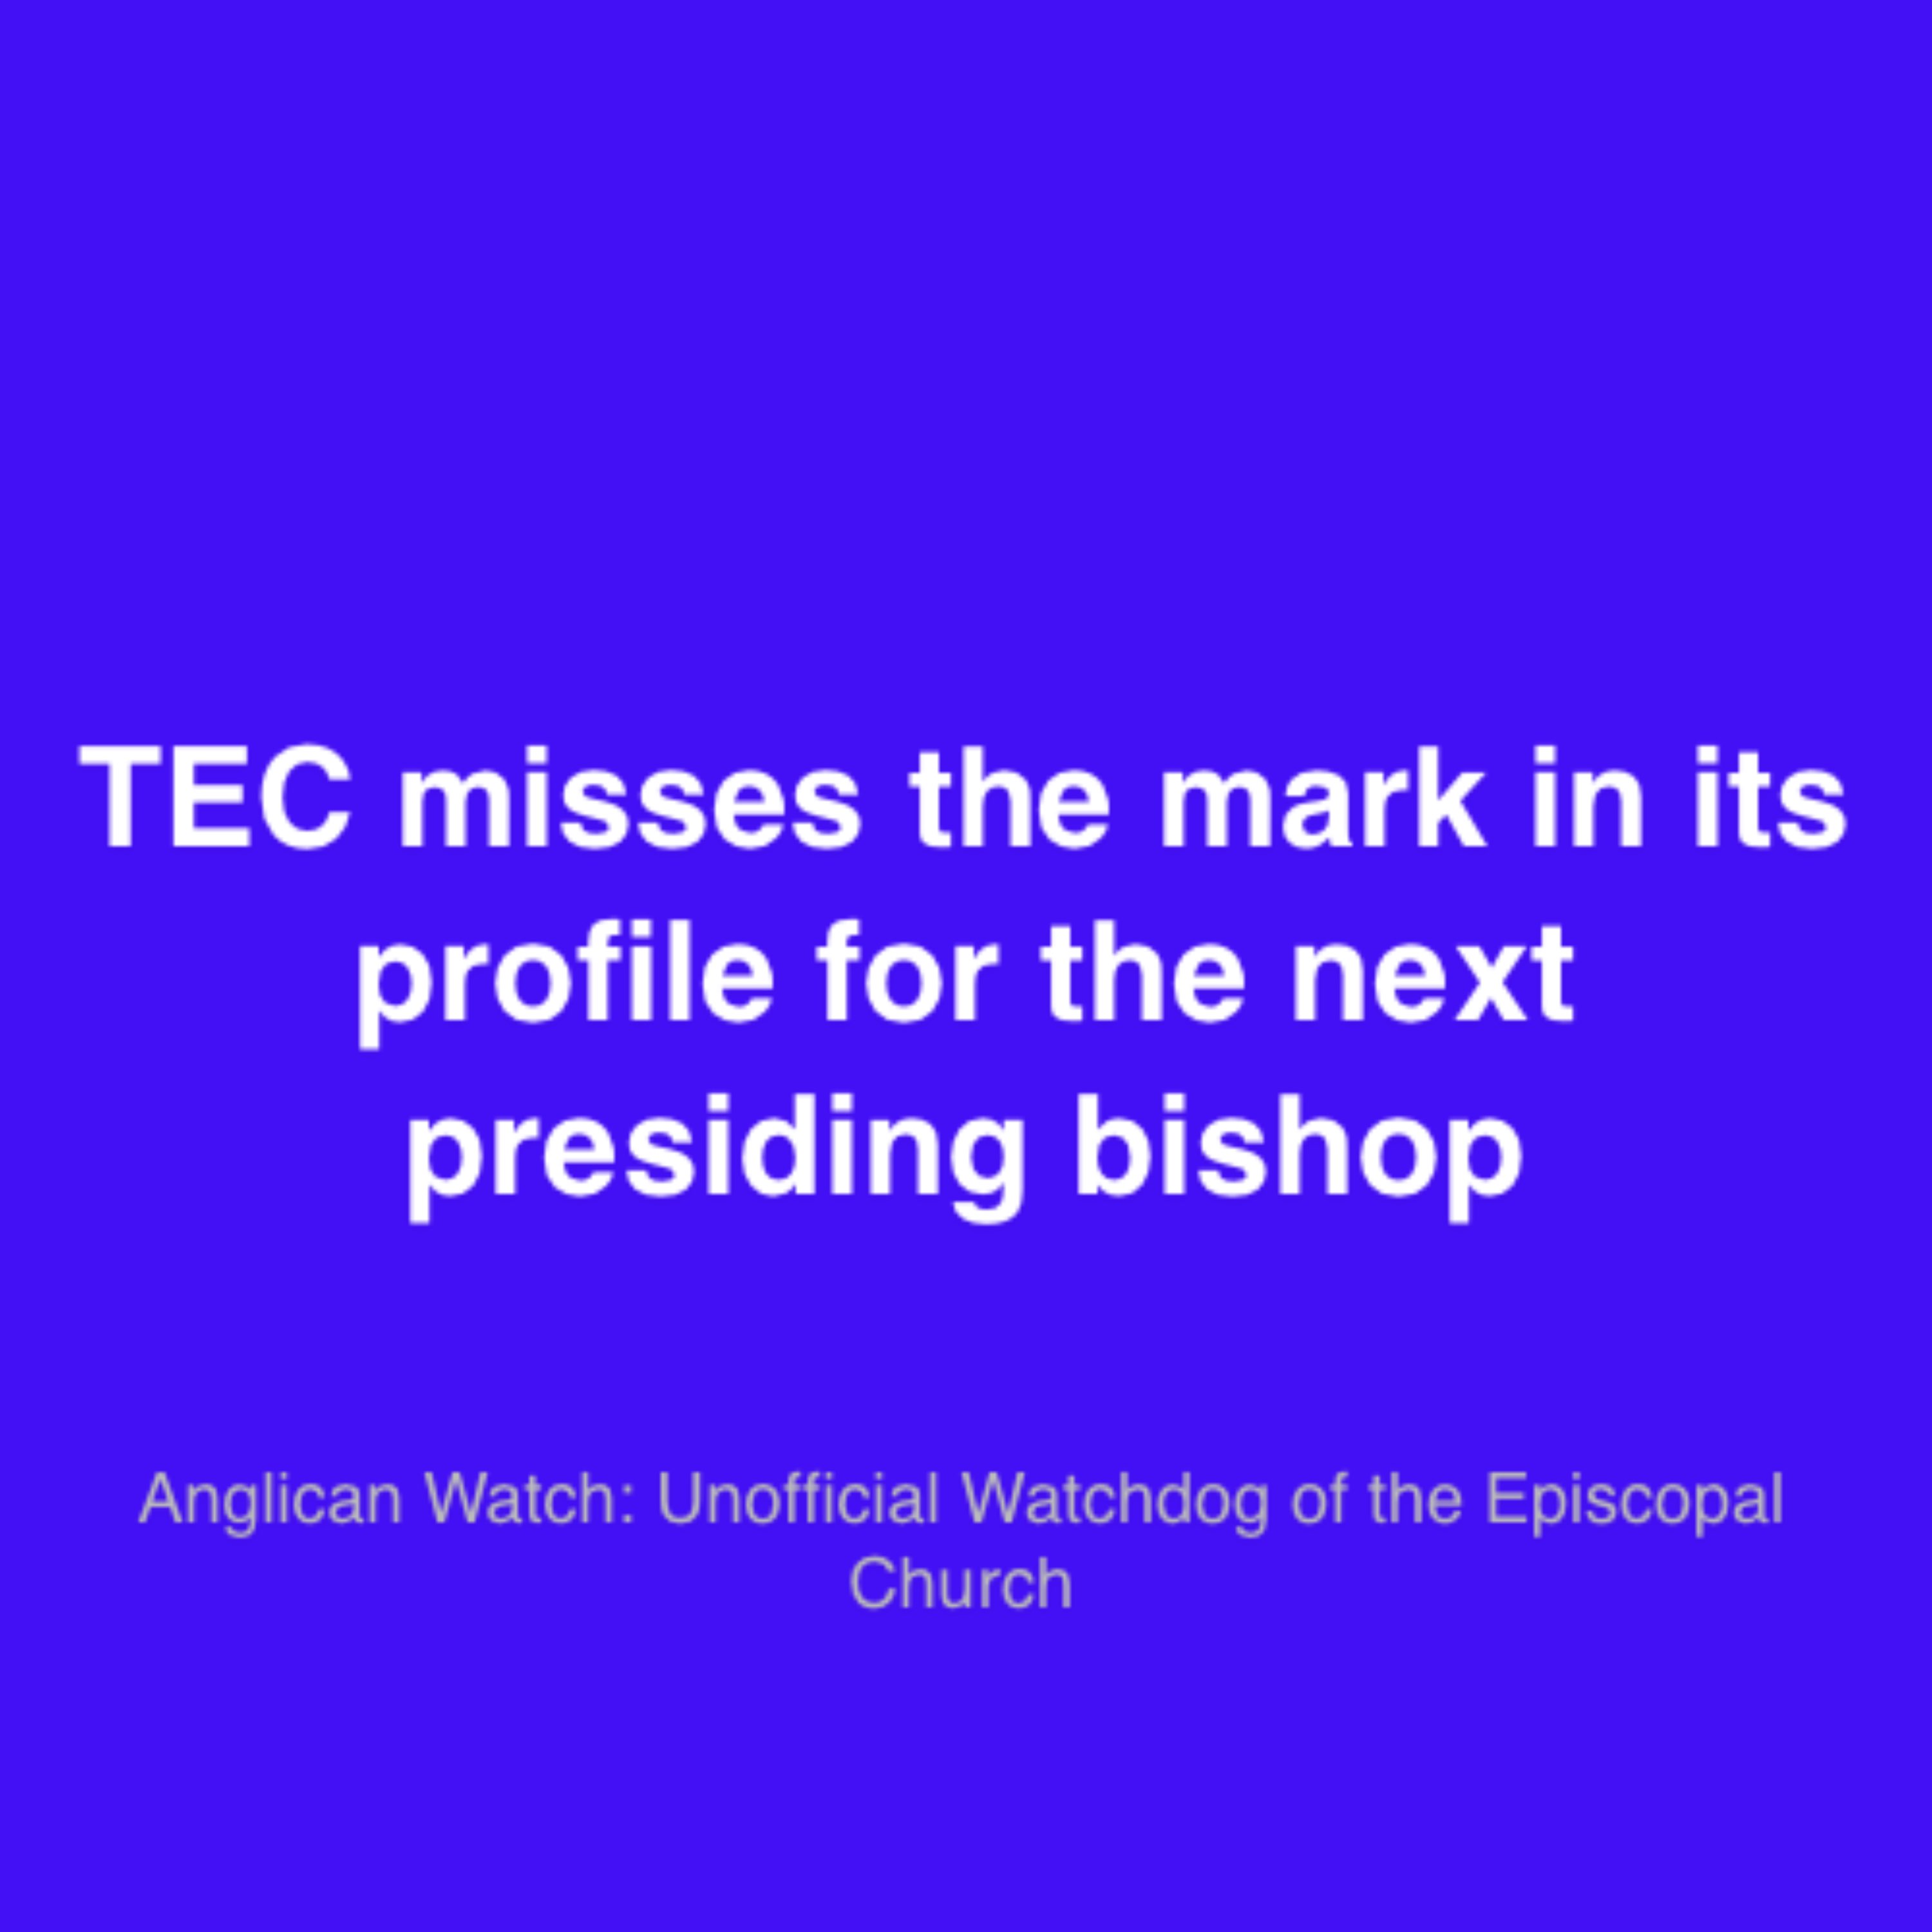 TEC misses the mark in its profile for the next presiding bishop